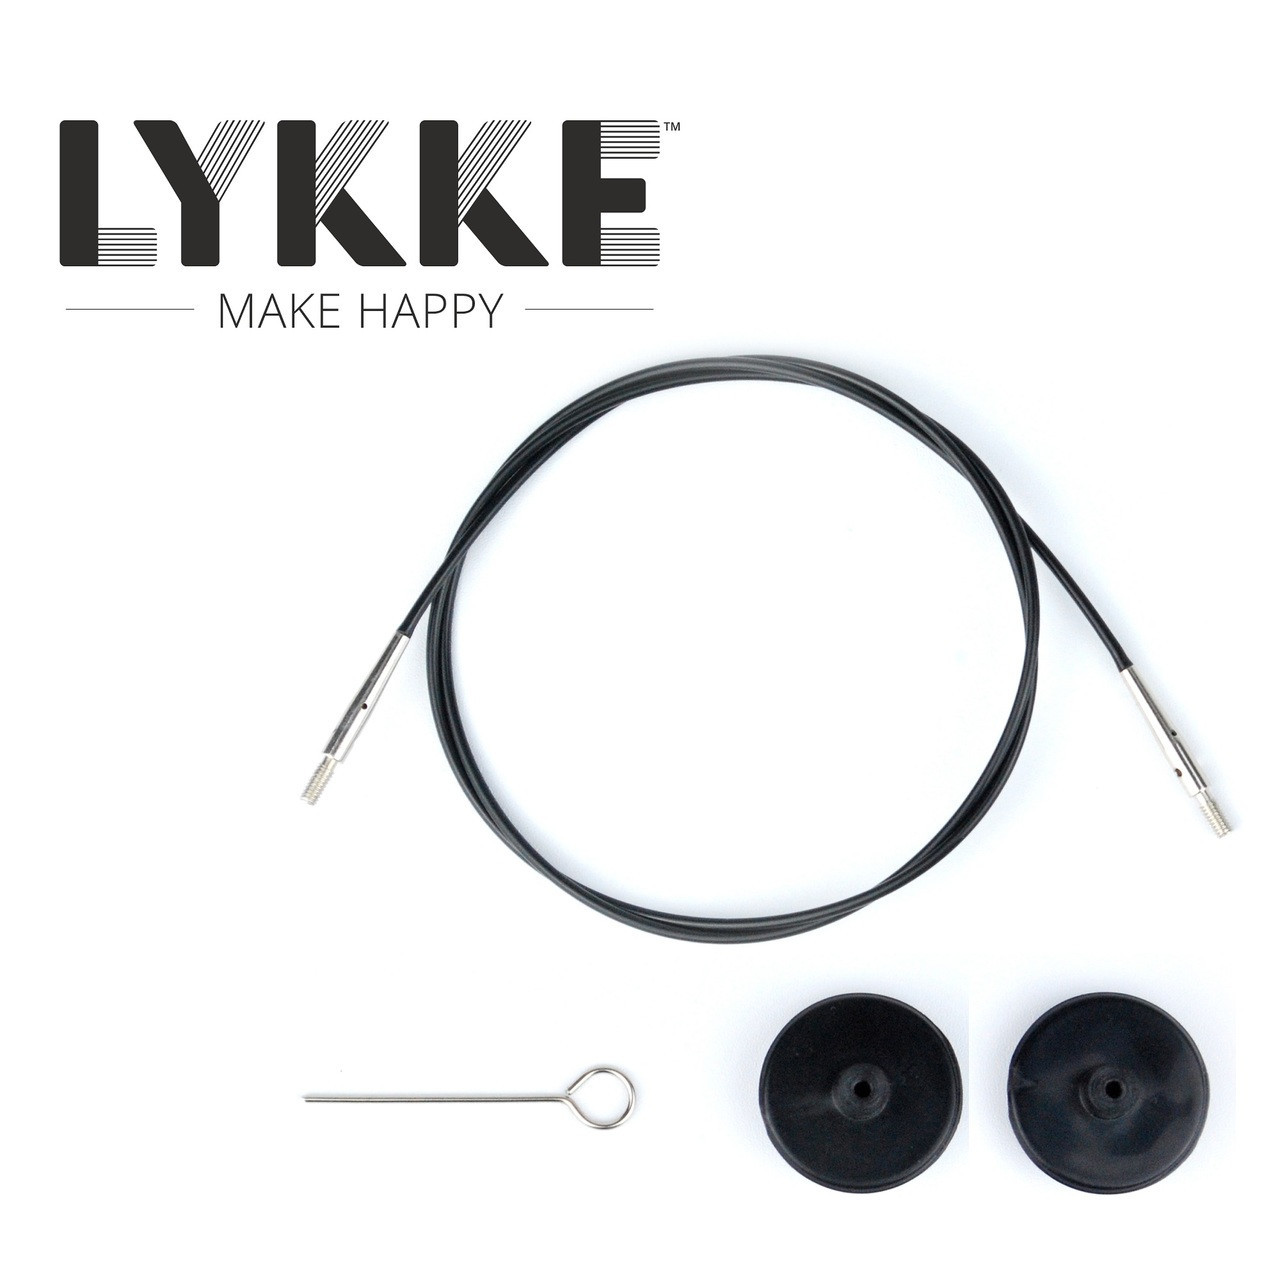  Lykke Interchangeable Cords (10''/25 cm to make 50 cm/20'' with  5 IC)